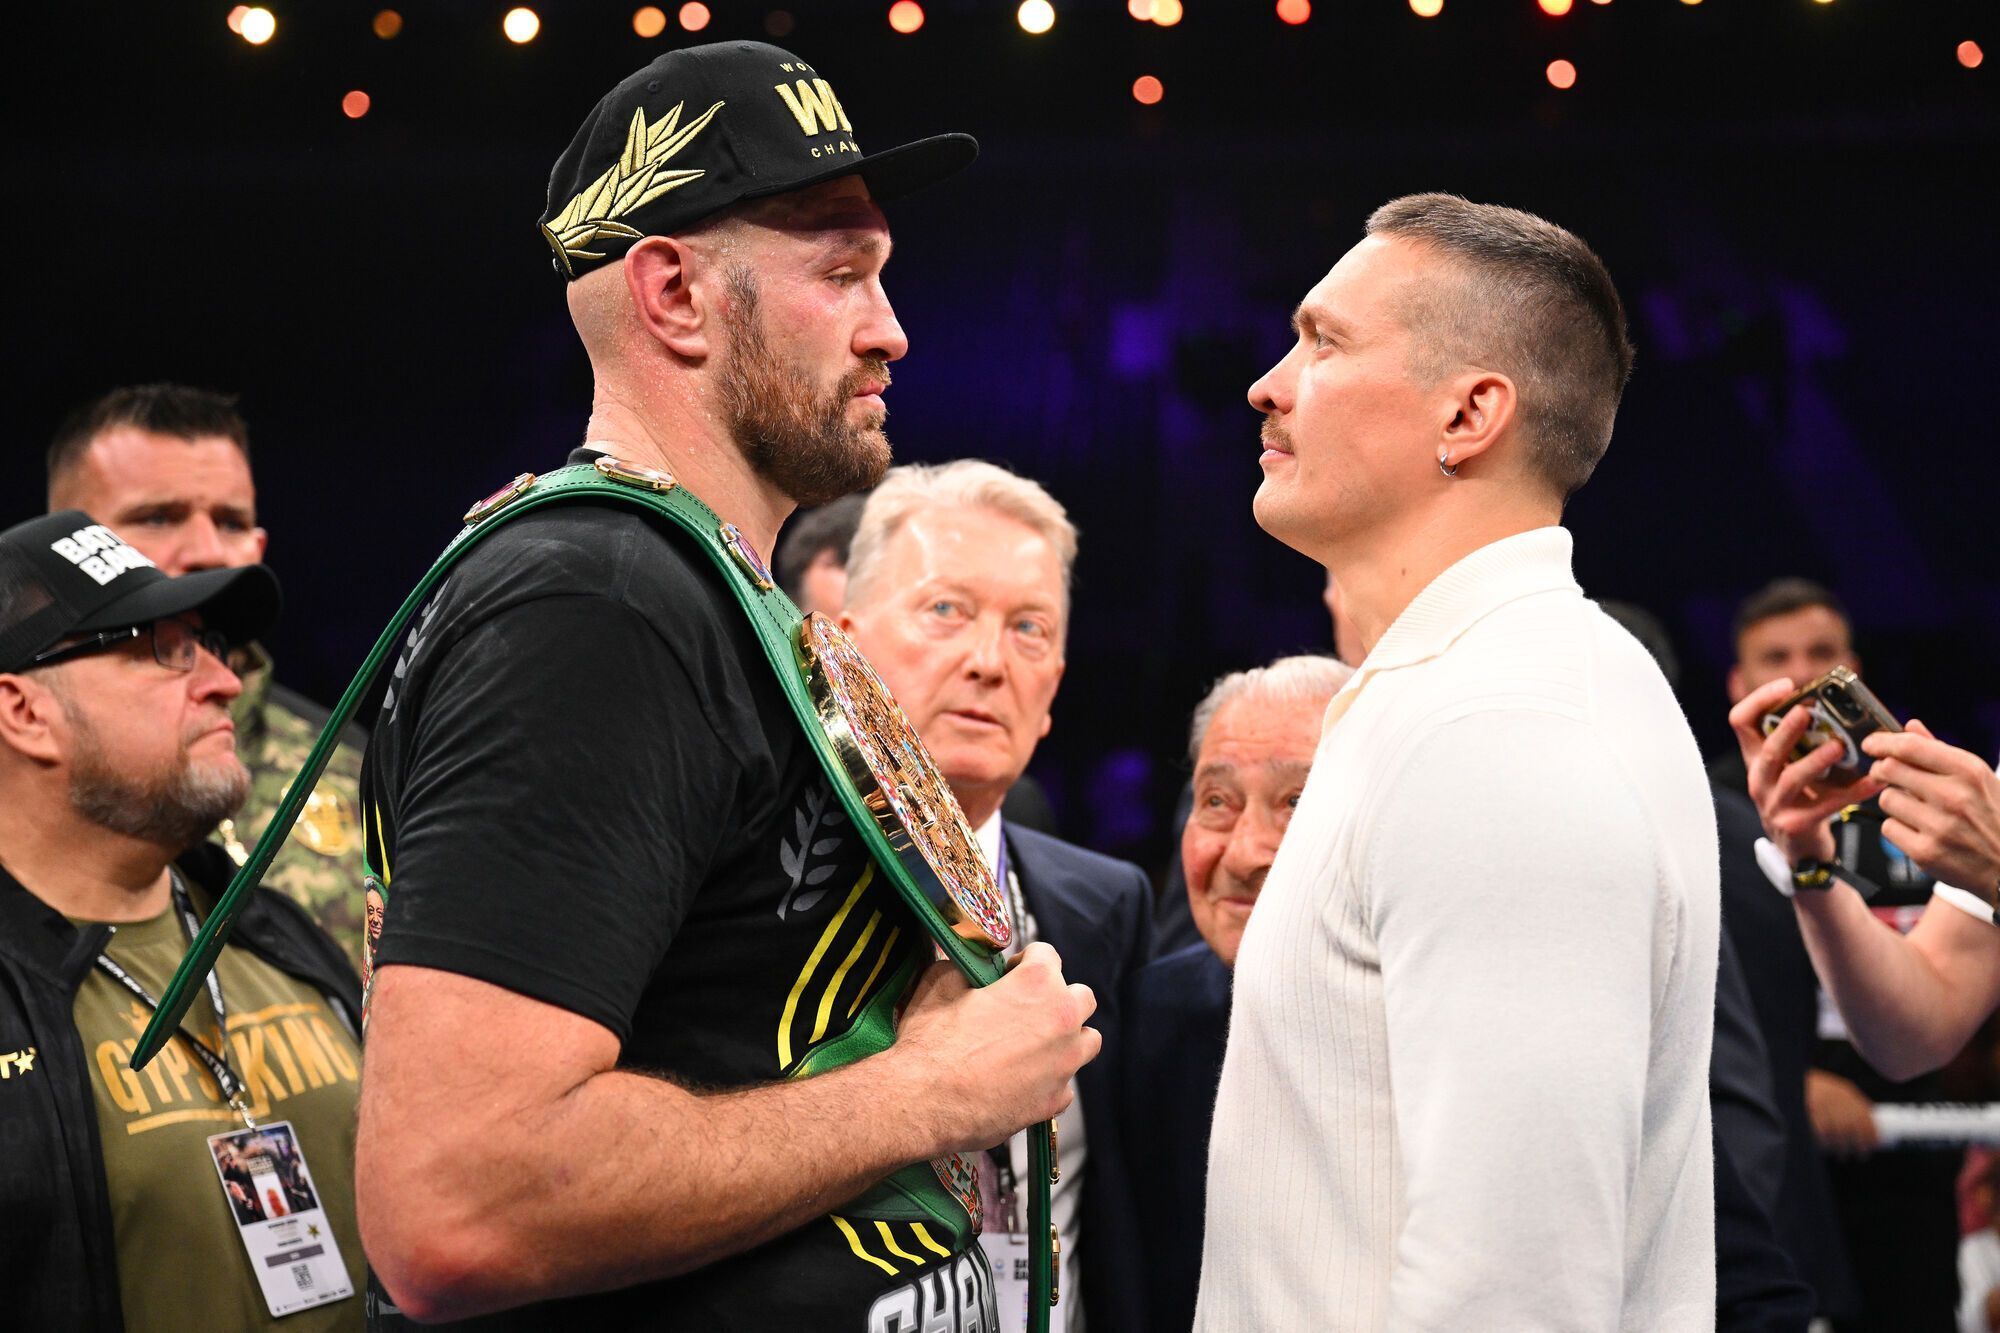 ''He'll just make himself look like an idiot'': ex-world champion ridiculed Fury over Usyk